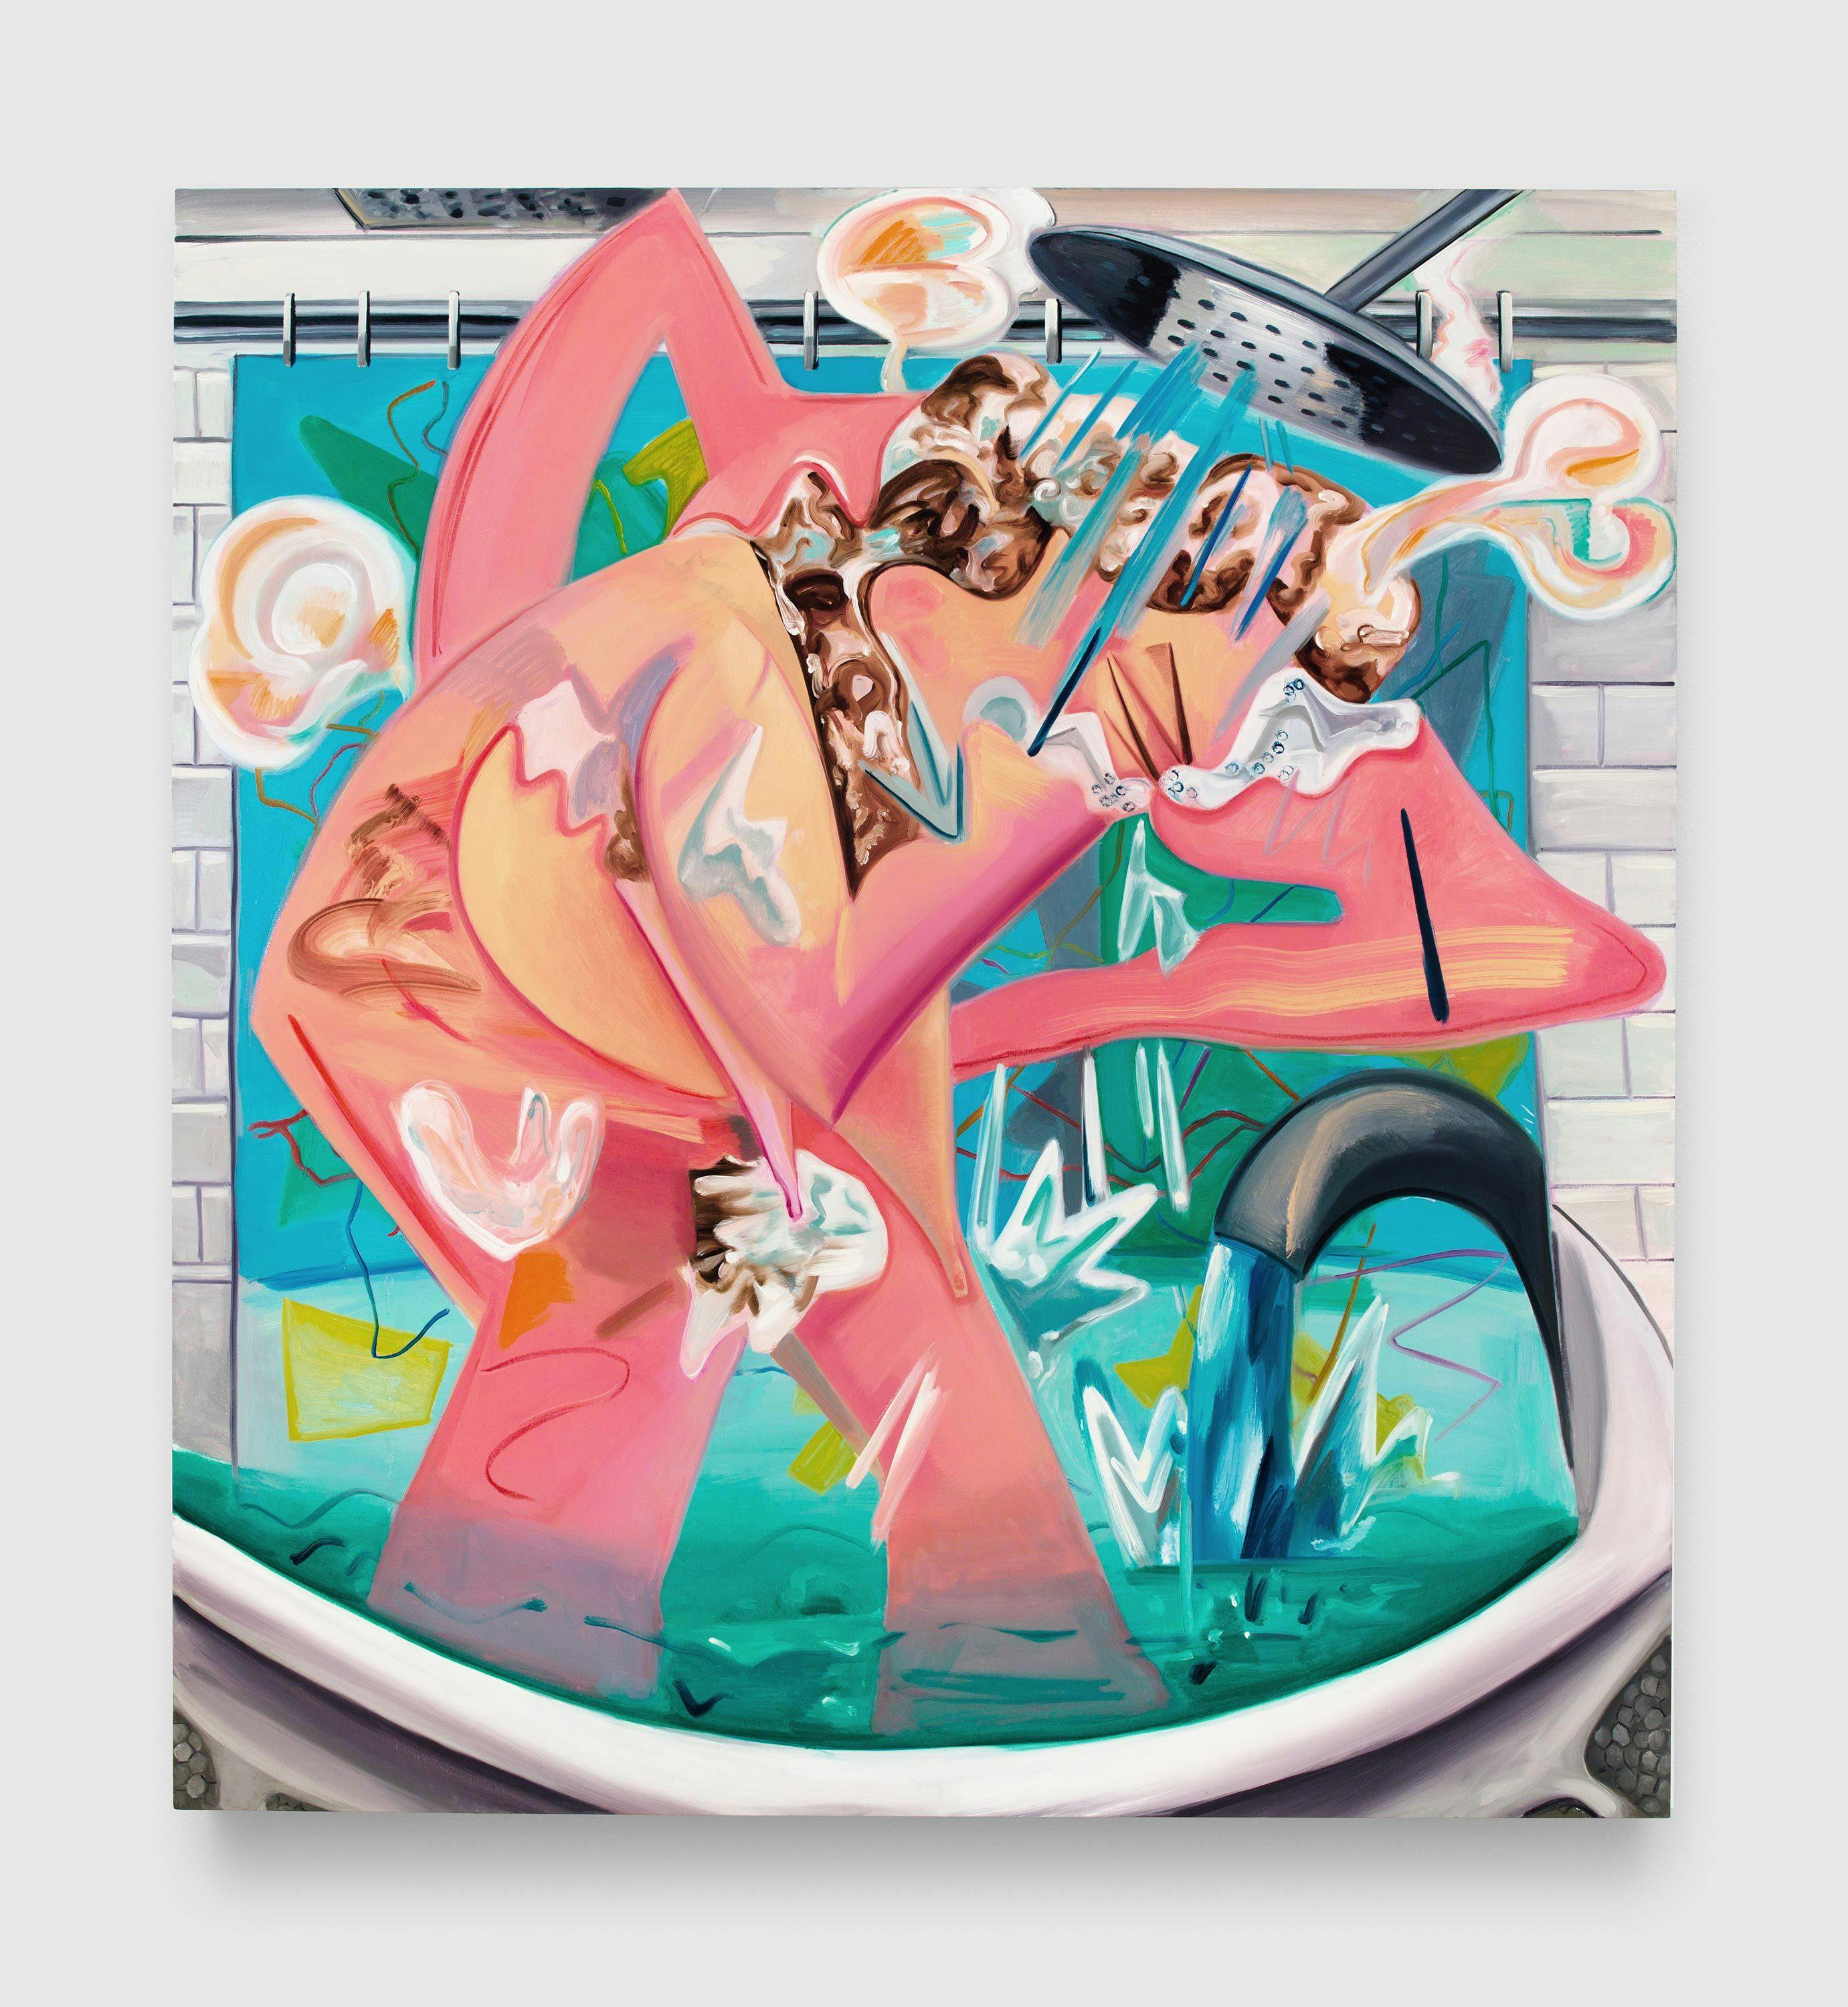 A painting by Dana Schutz, titled Slow Motion Shower, dated 2015.